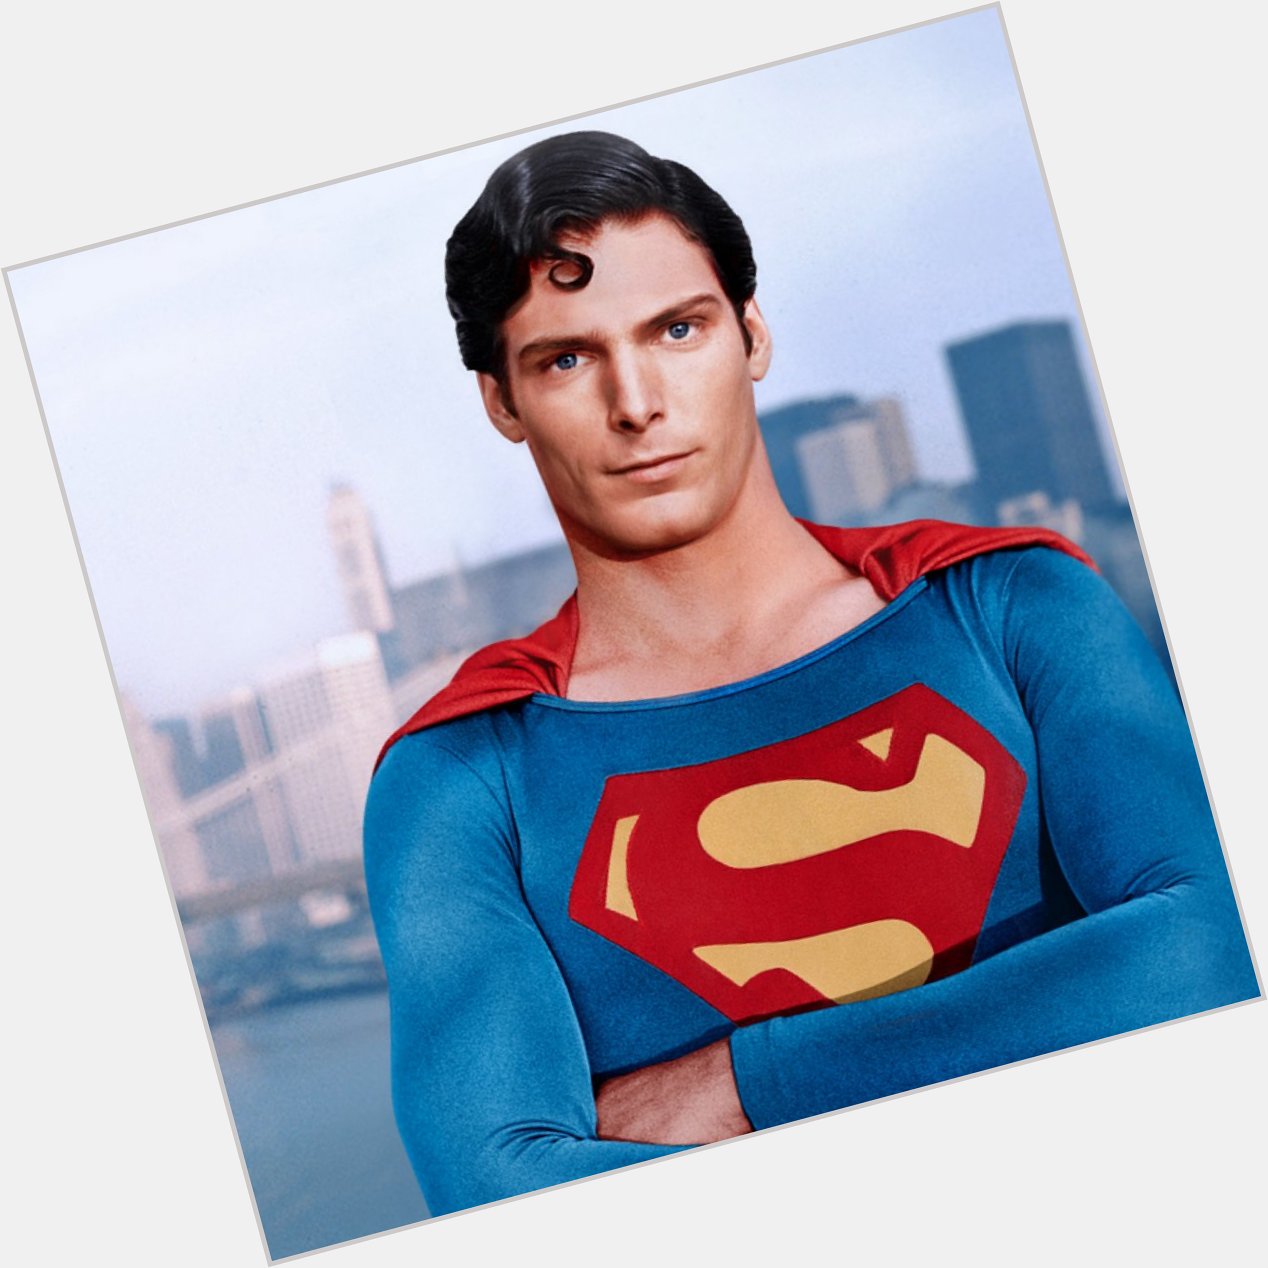 Christopher Reeve, who would have been 69 years old today, was such an iconic looking Happy birthday 